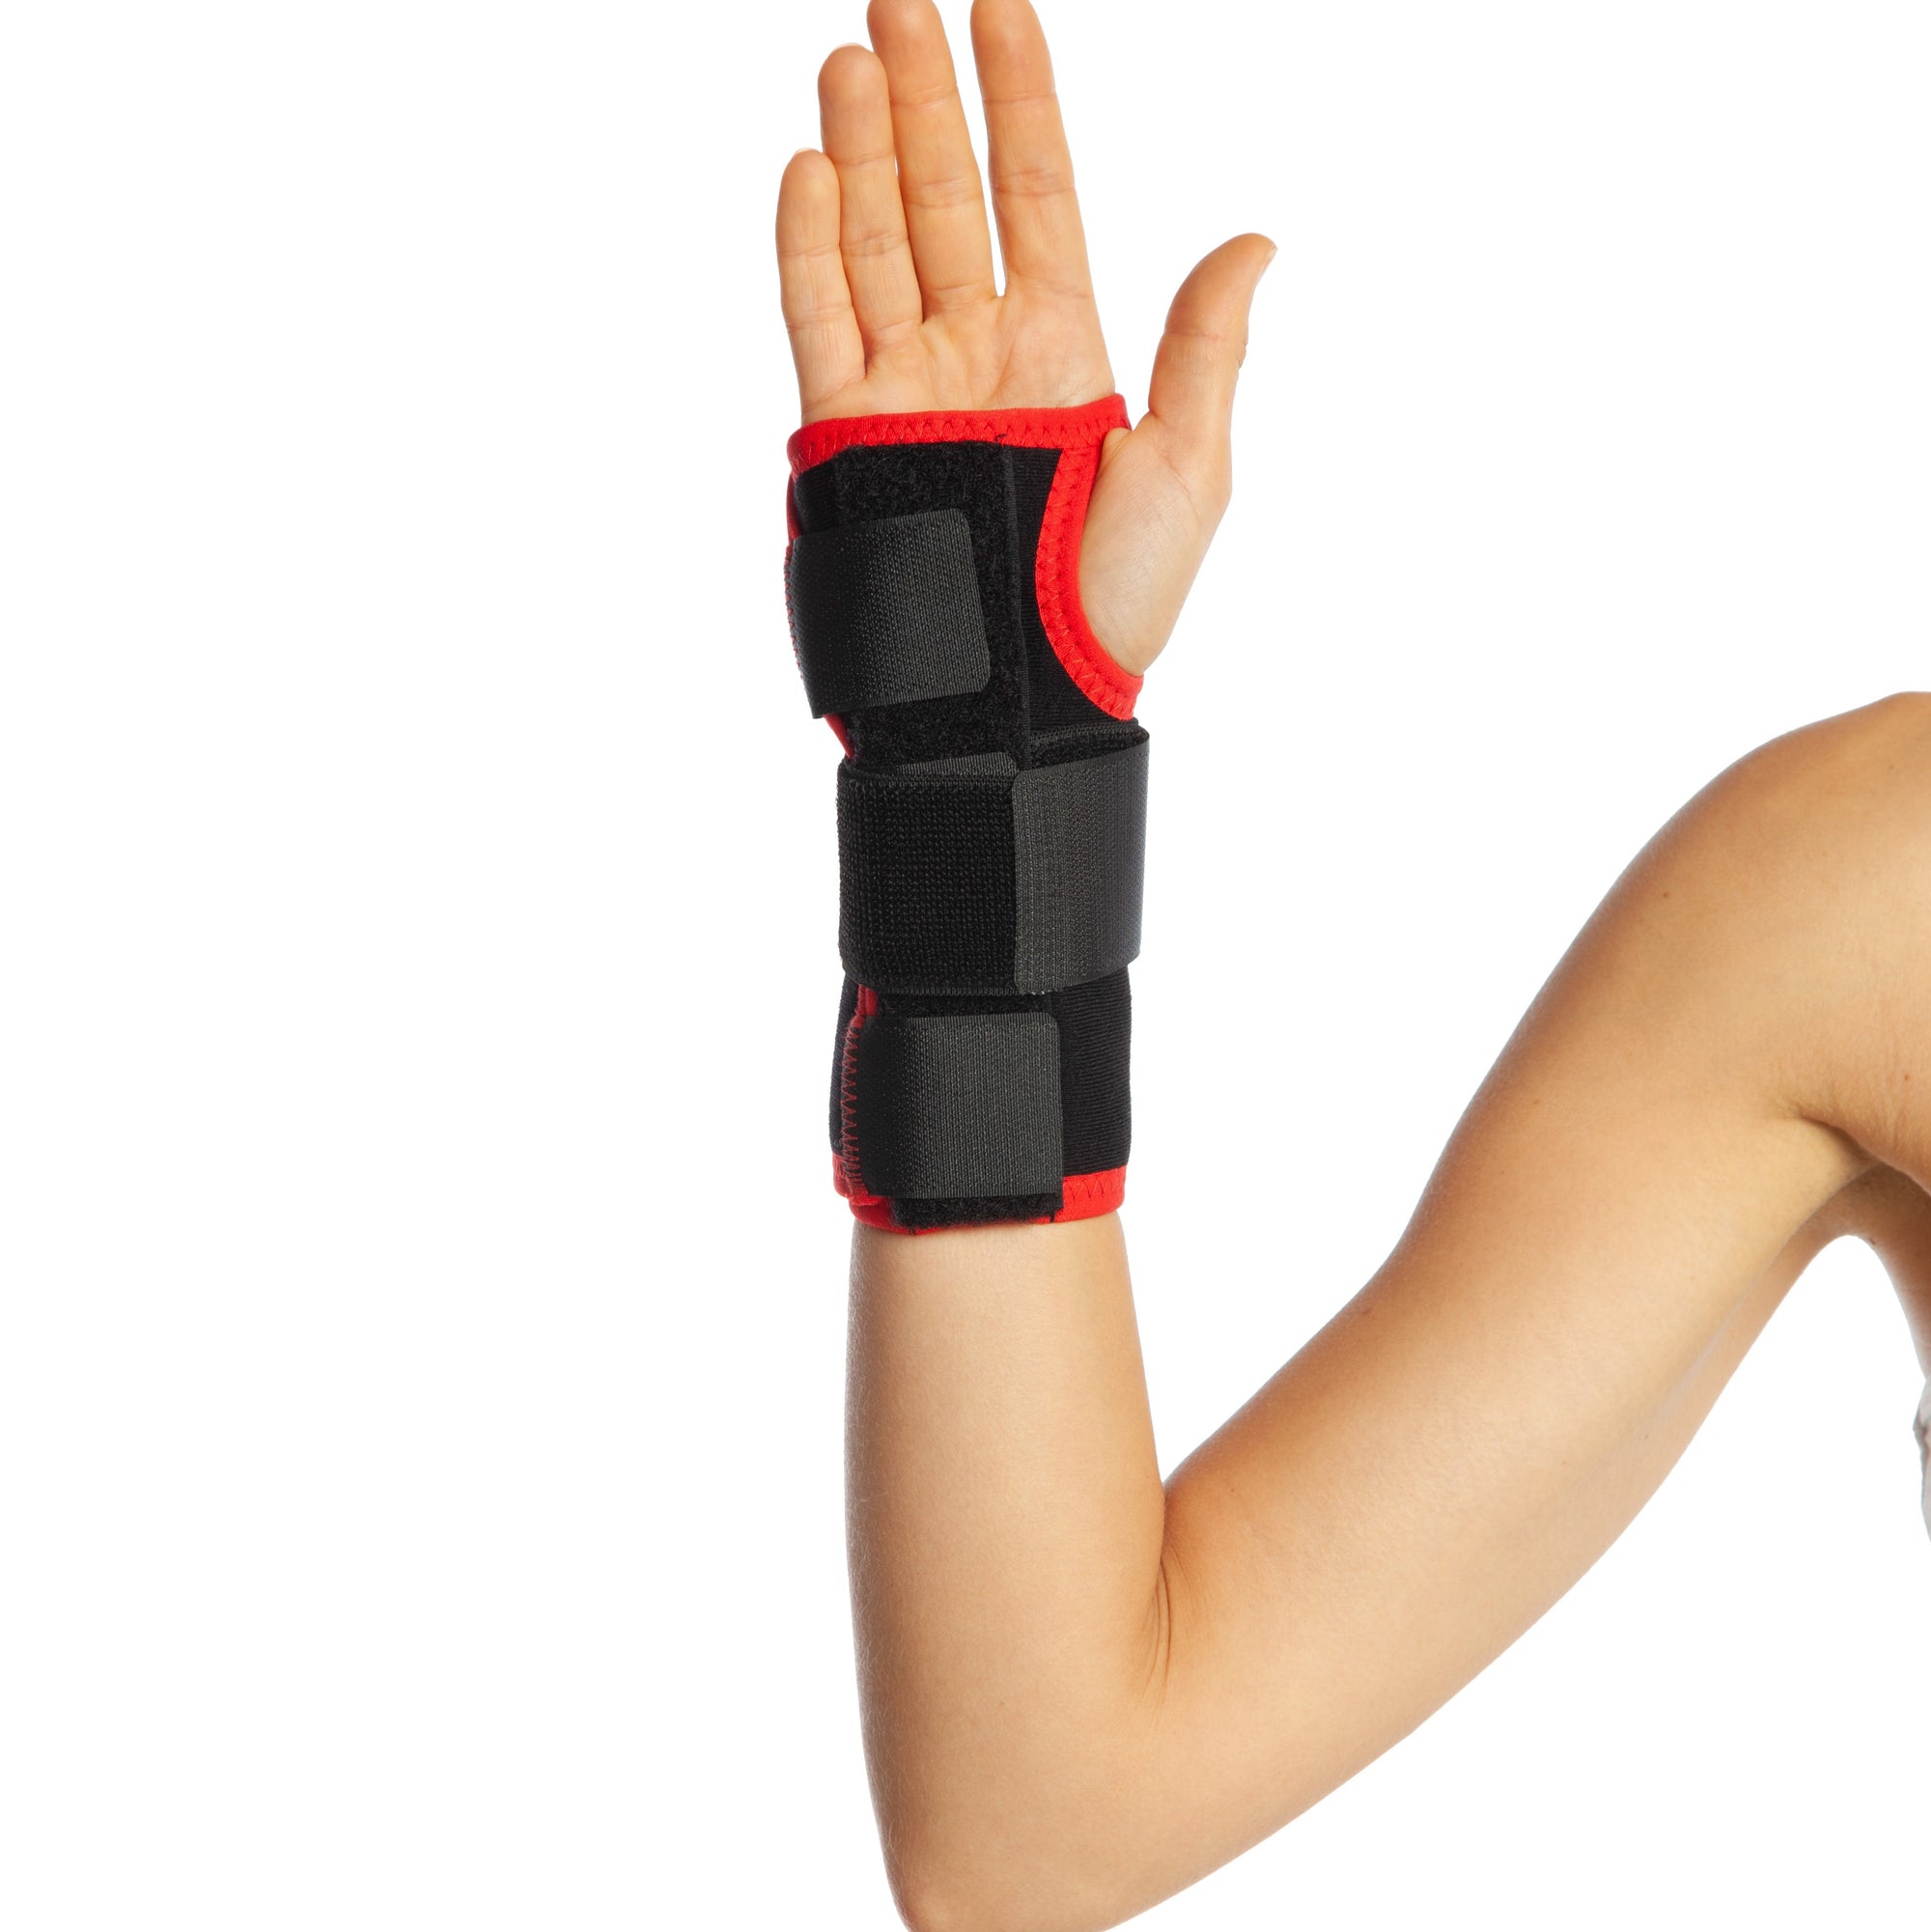 ArmoLine Carpal Wrist and Thumb Support close photoshoot